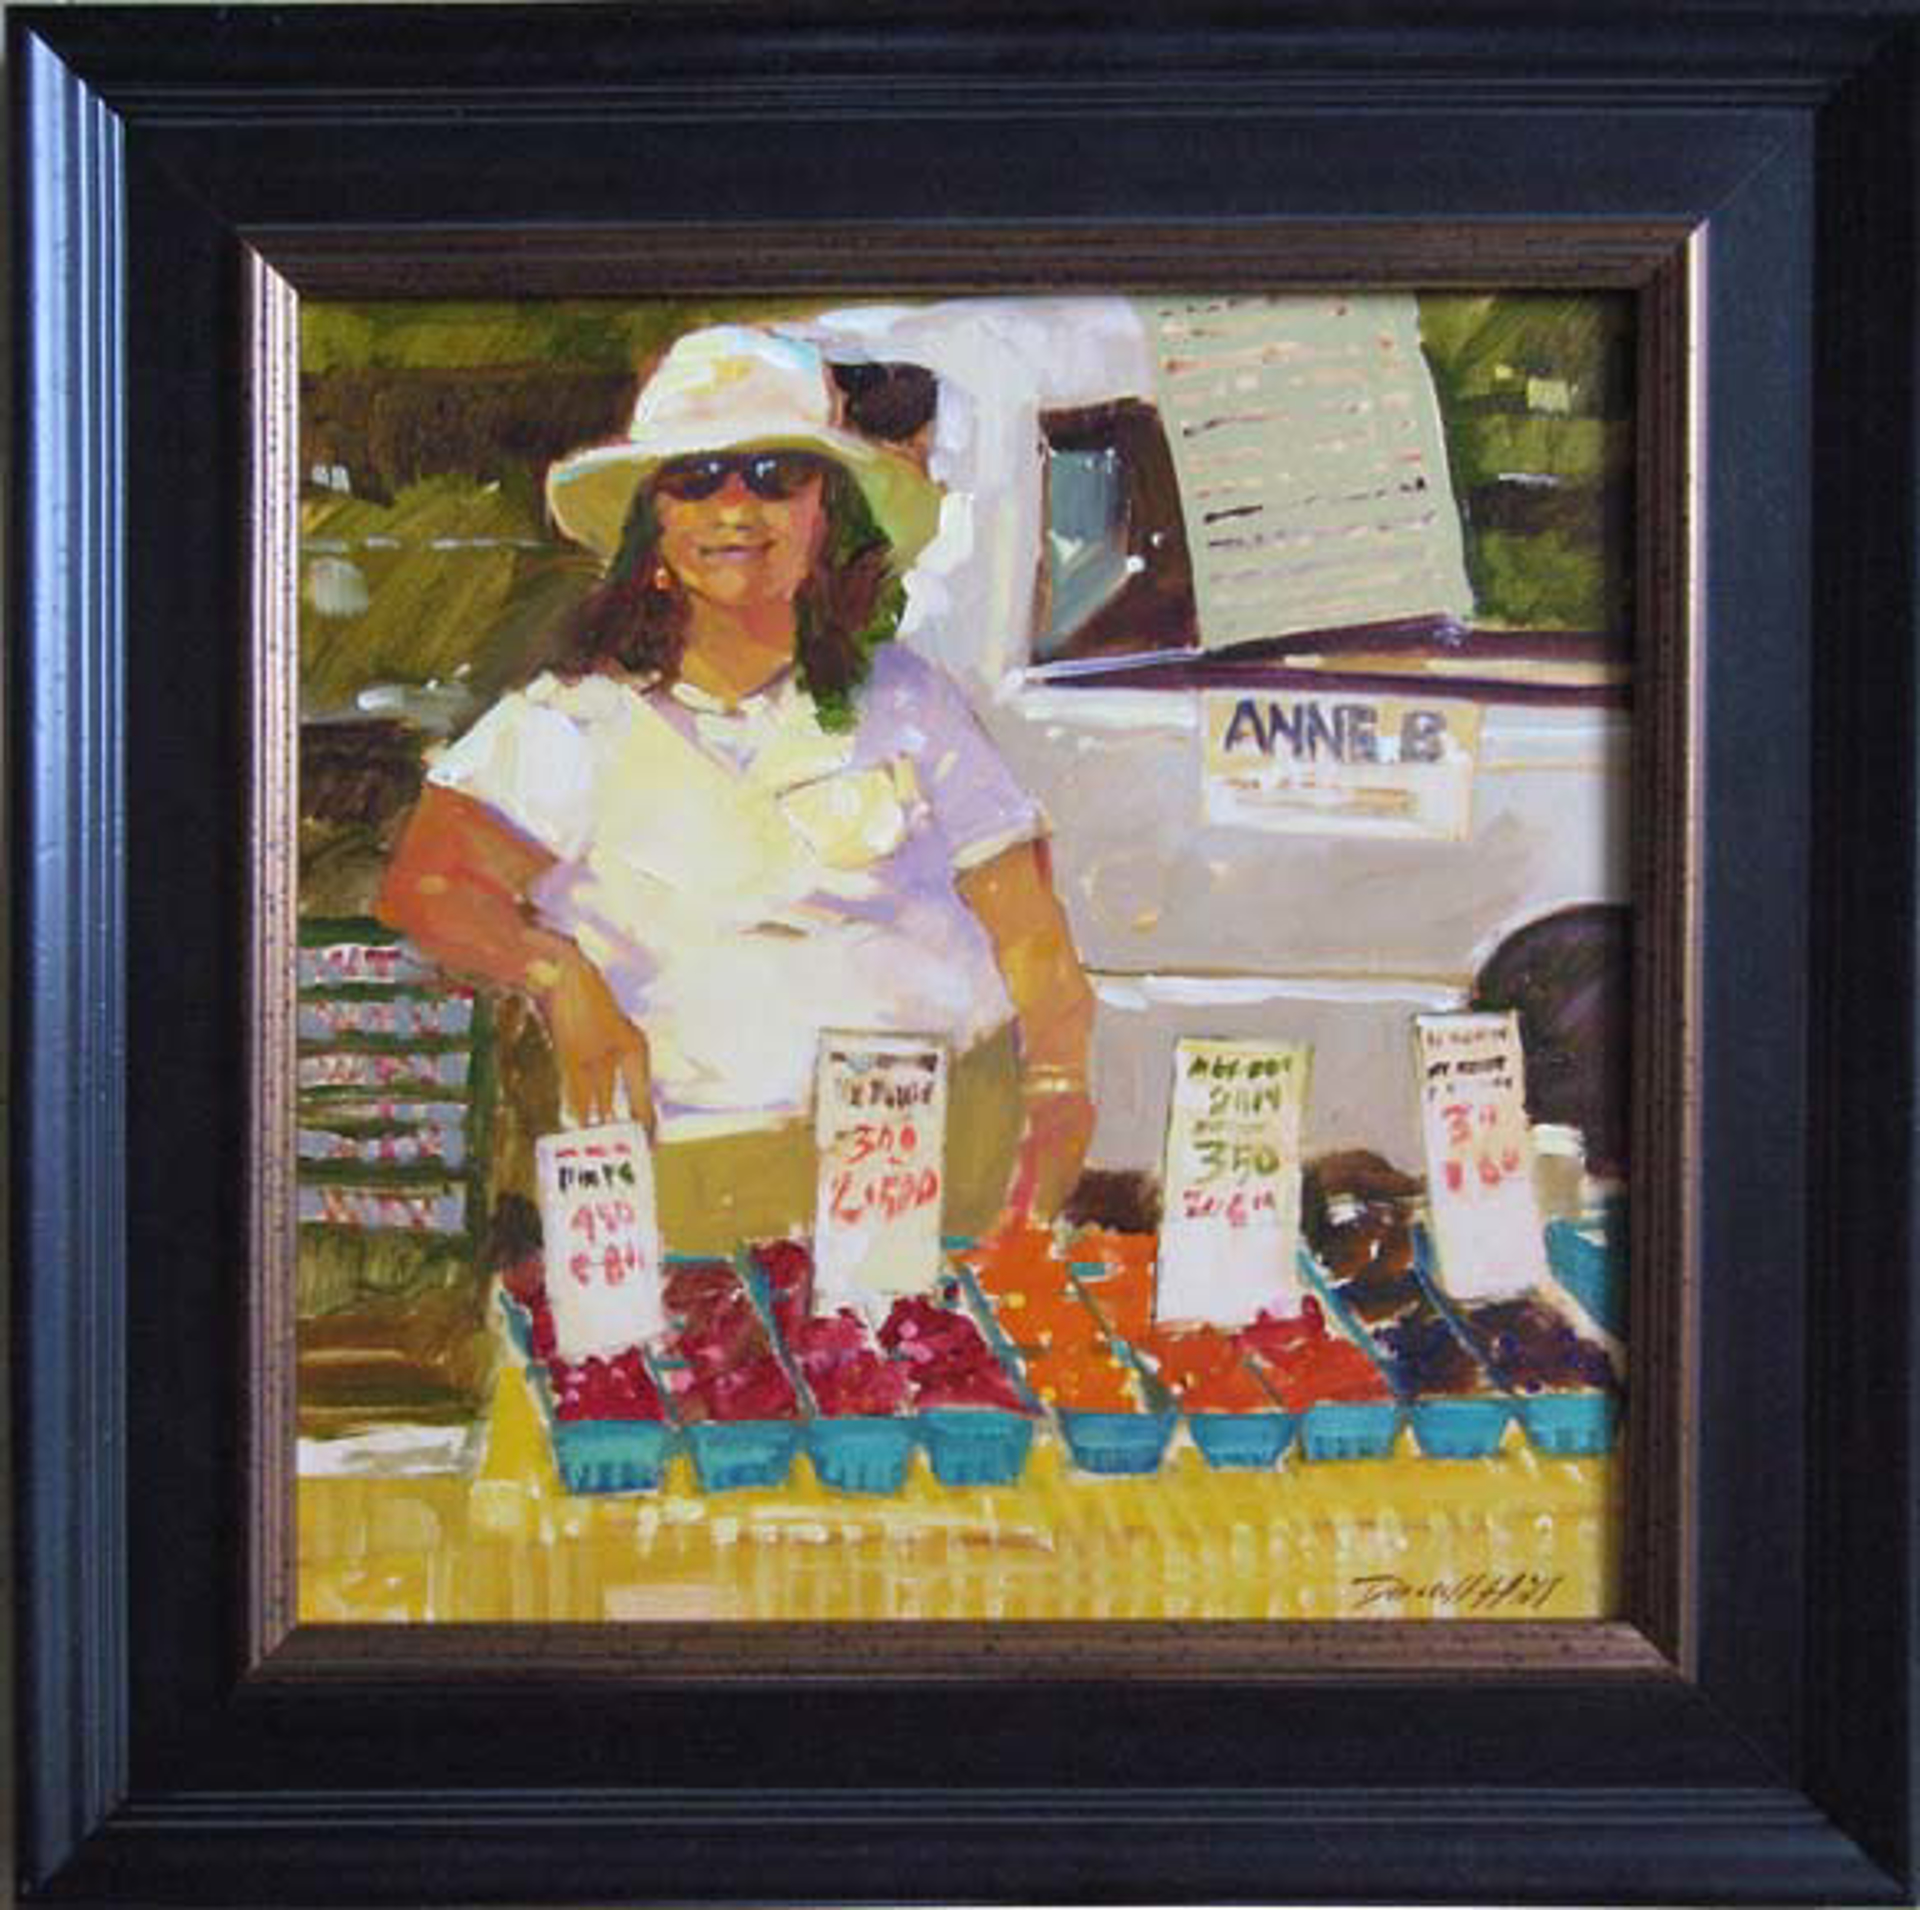 Berries For Sale - Original by Darrell Hill